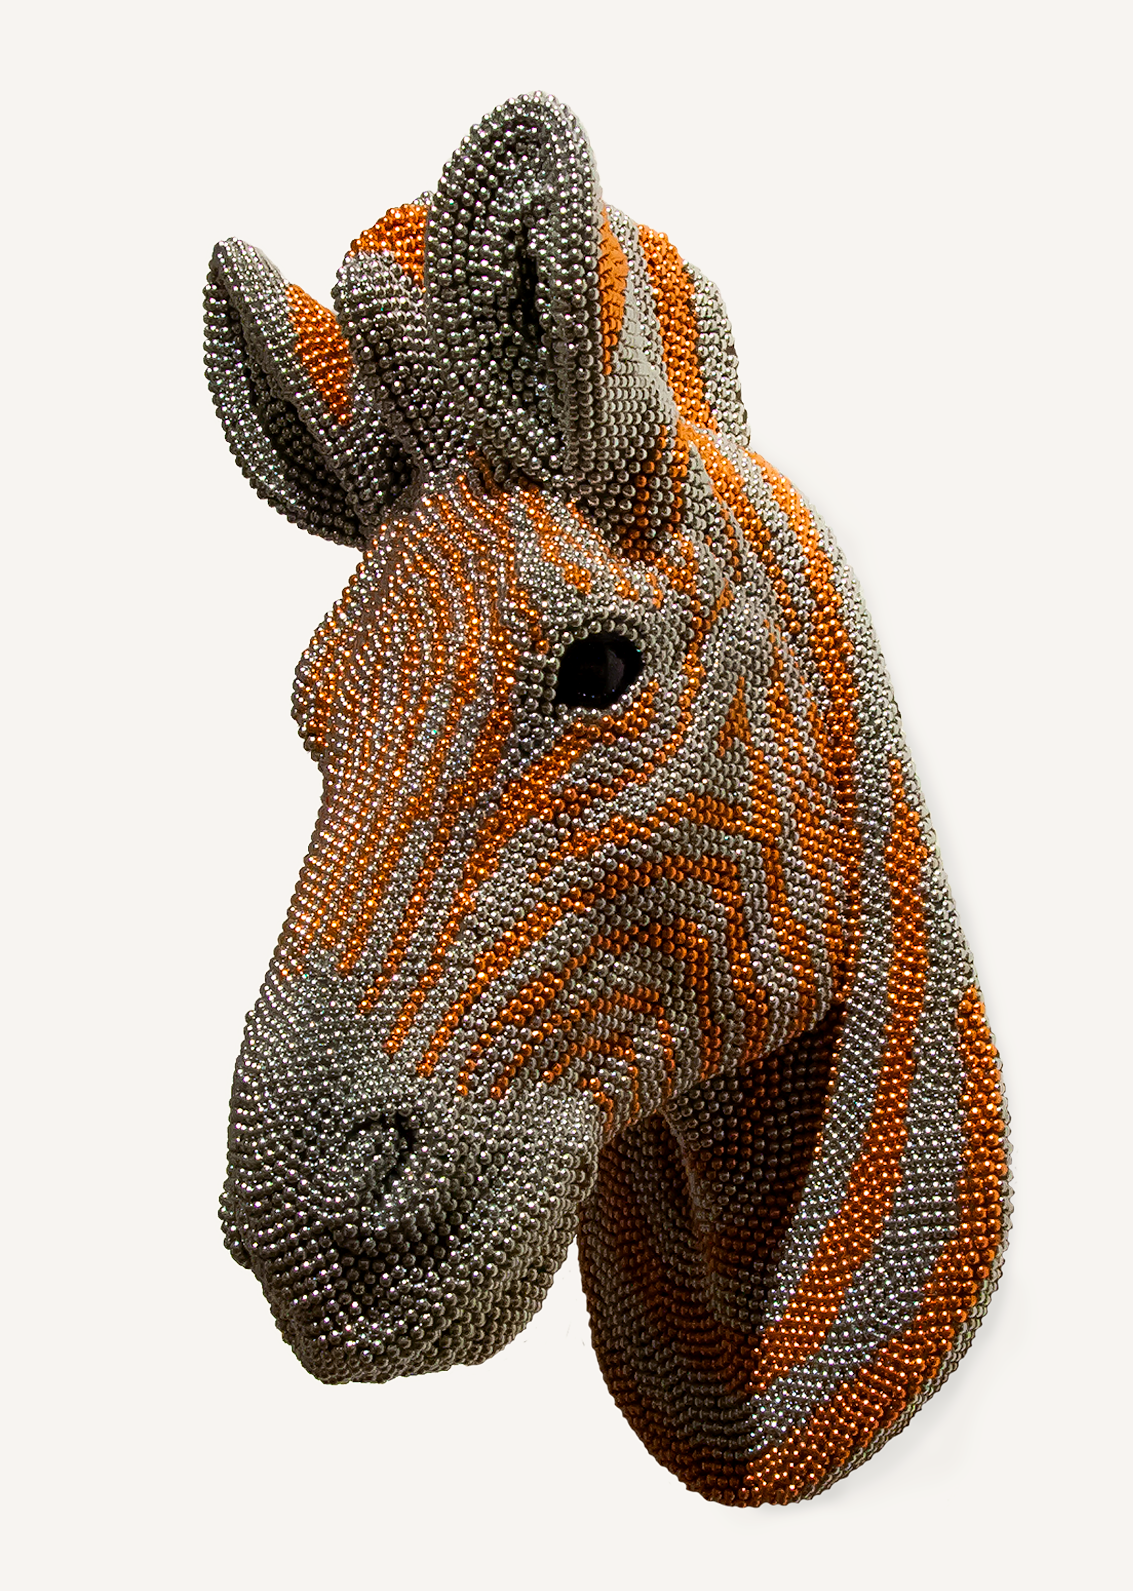 Courtney Timmermans, Zebra, 2017, air rifle BBs, cast resin, mixed media,18 x 7.5 x 9 in. (4)